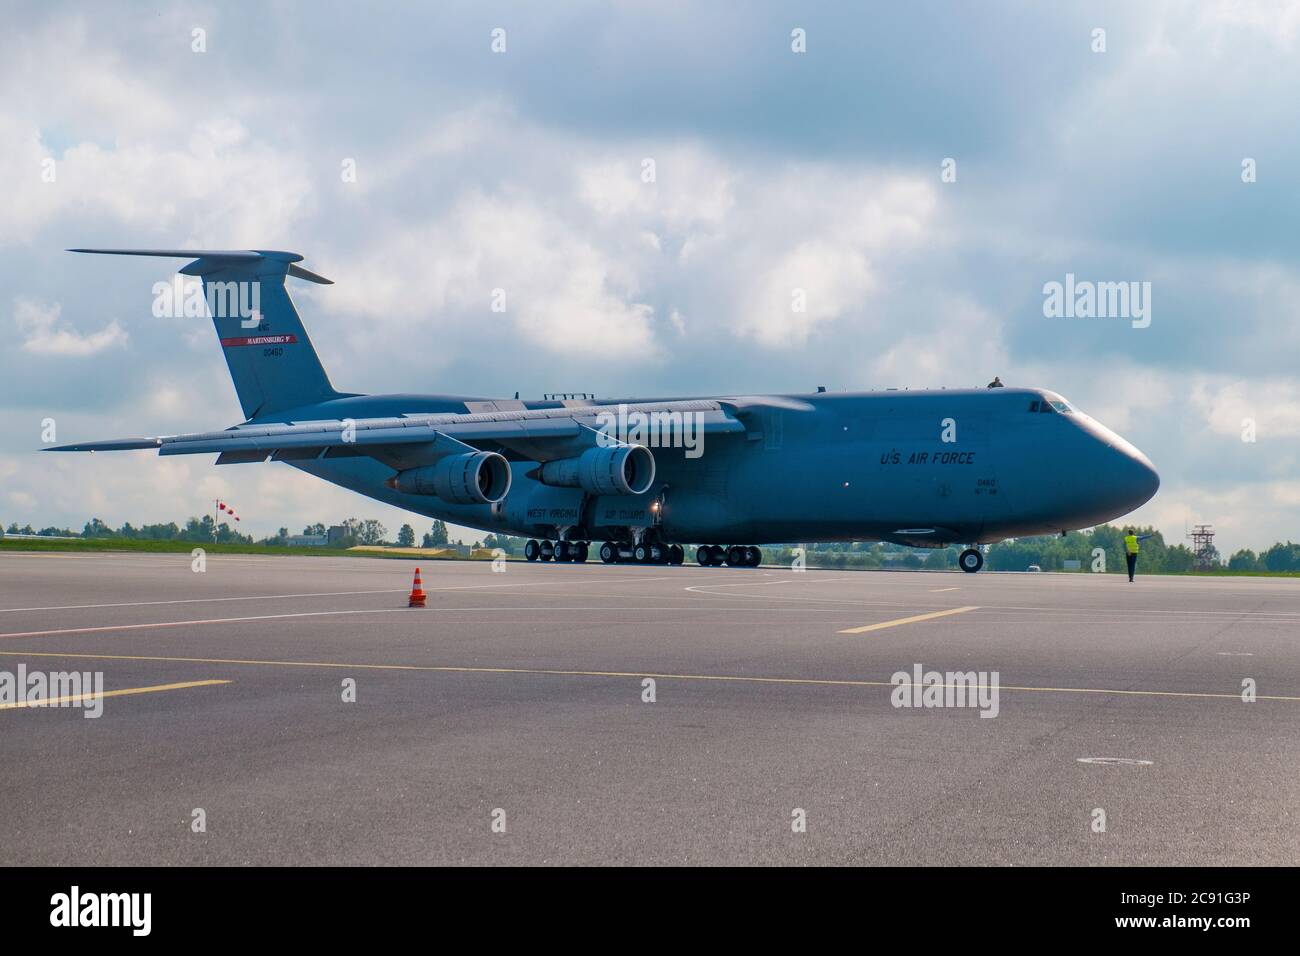 A jumbo C-5 Air Force plane flown by the Air National Guard from West Virginia carrying a load of Strykers lands. On the Tarmac at the Vilnius Interna Stock Photo